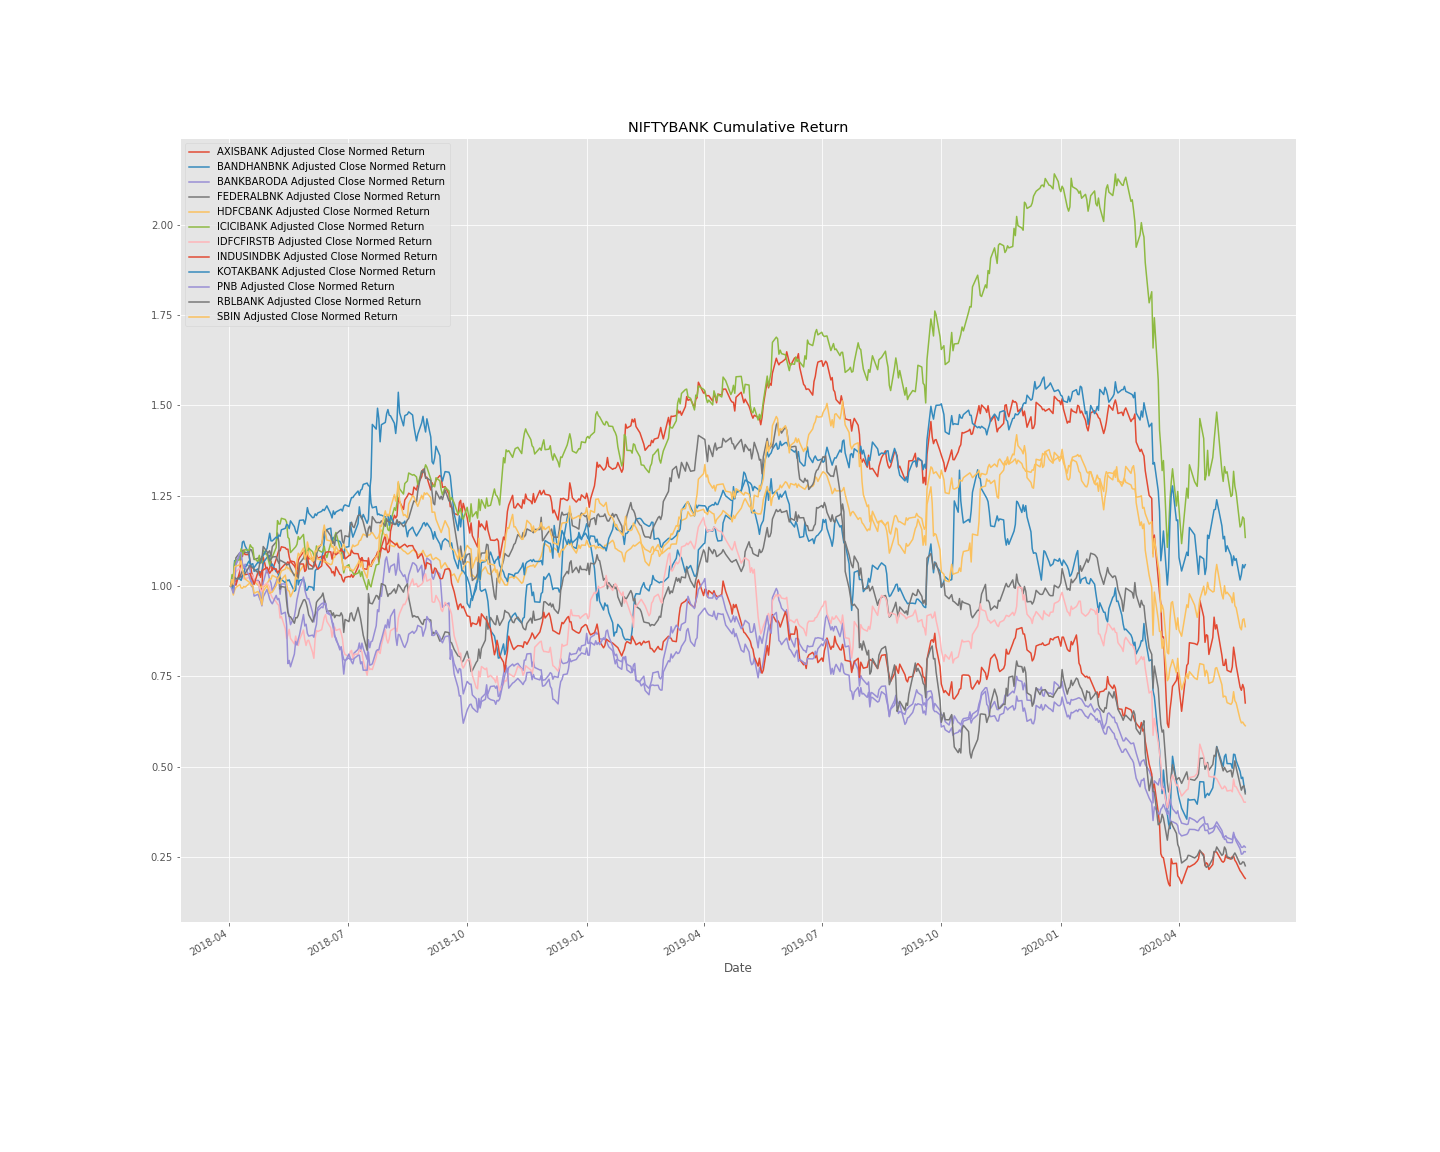 NIFTYBANK Index Stocks - Normalized Cumulative Returns